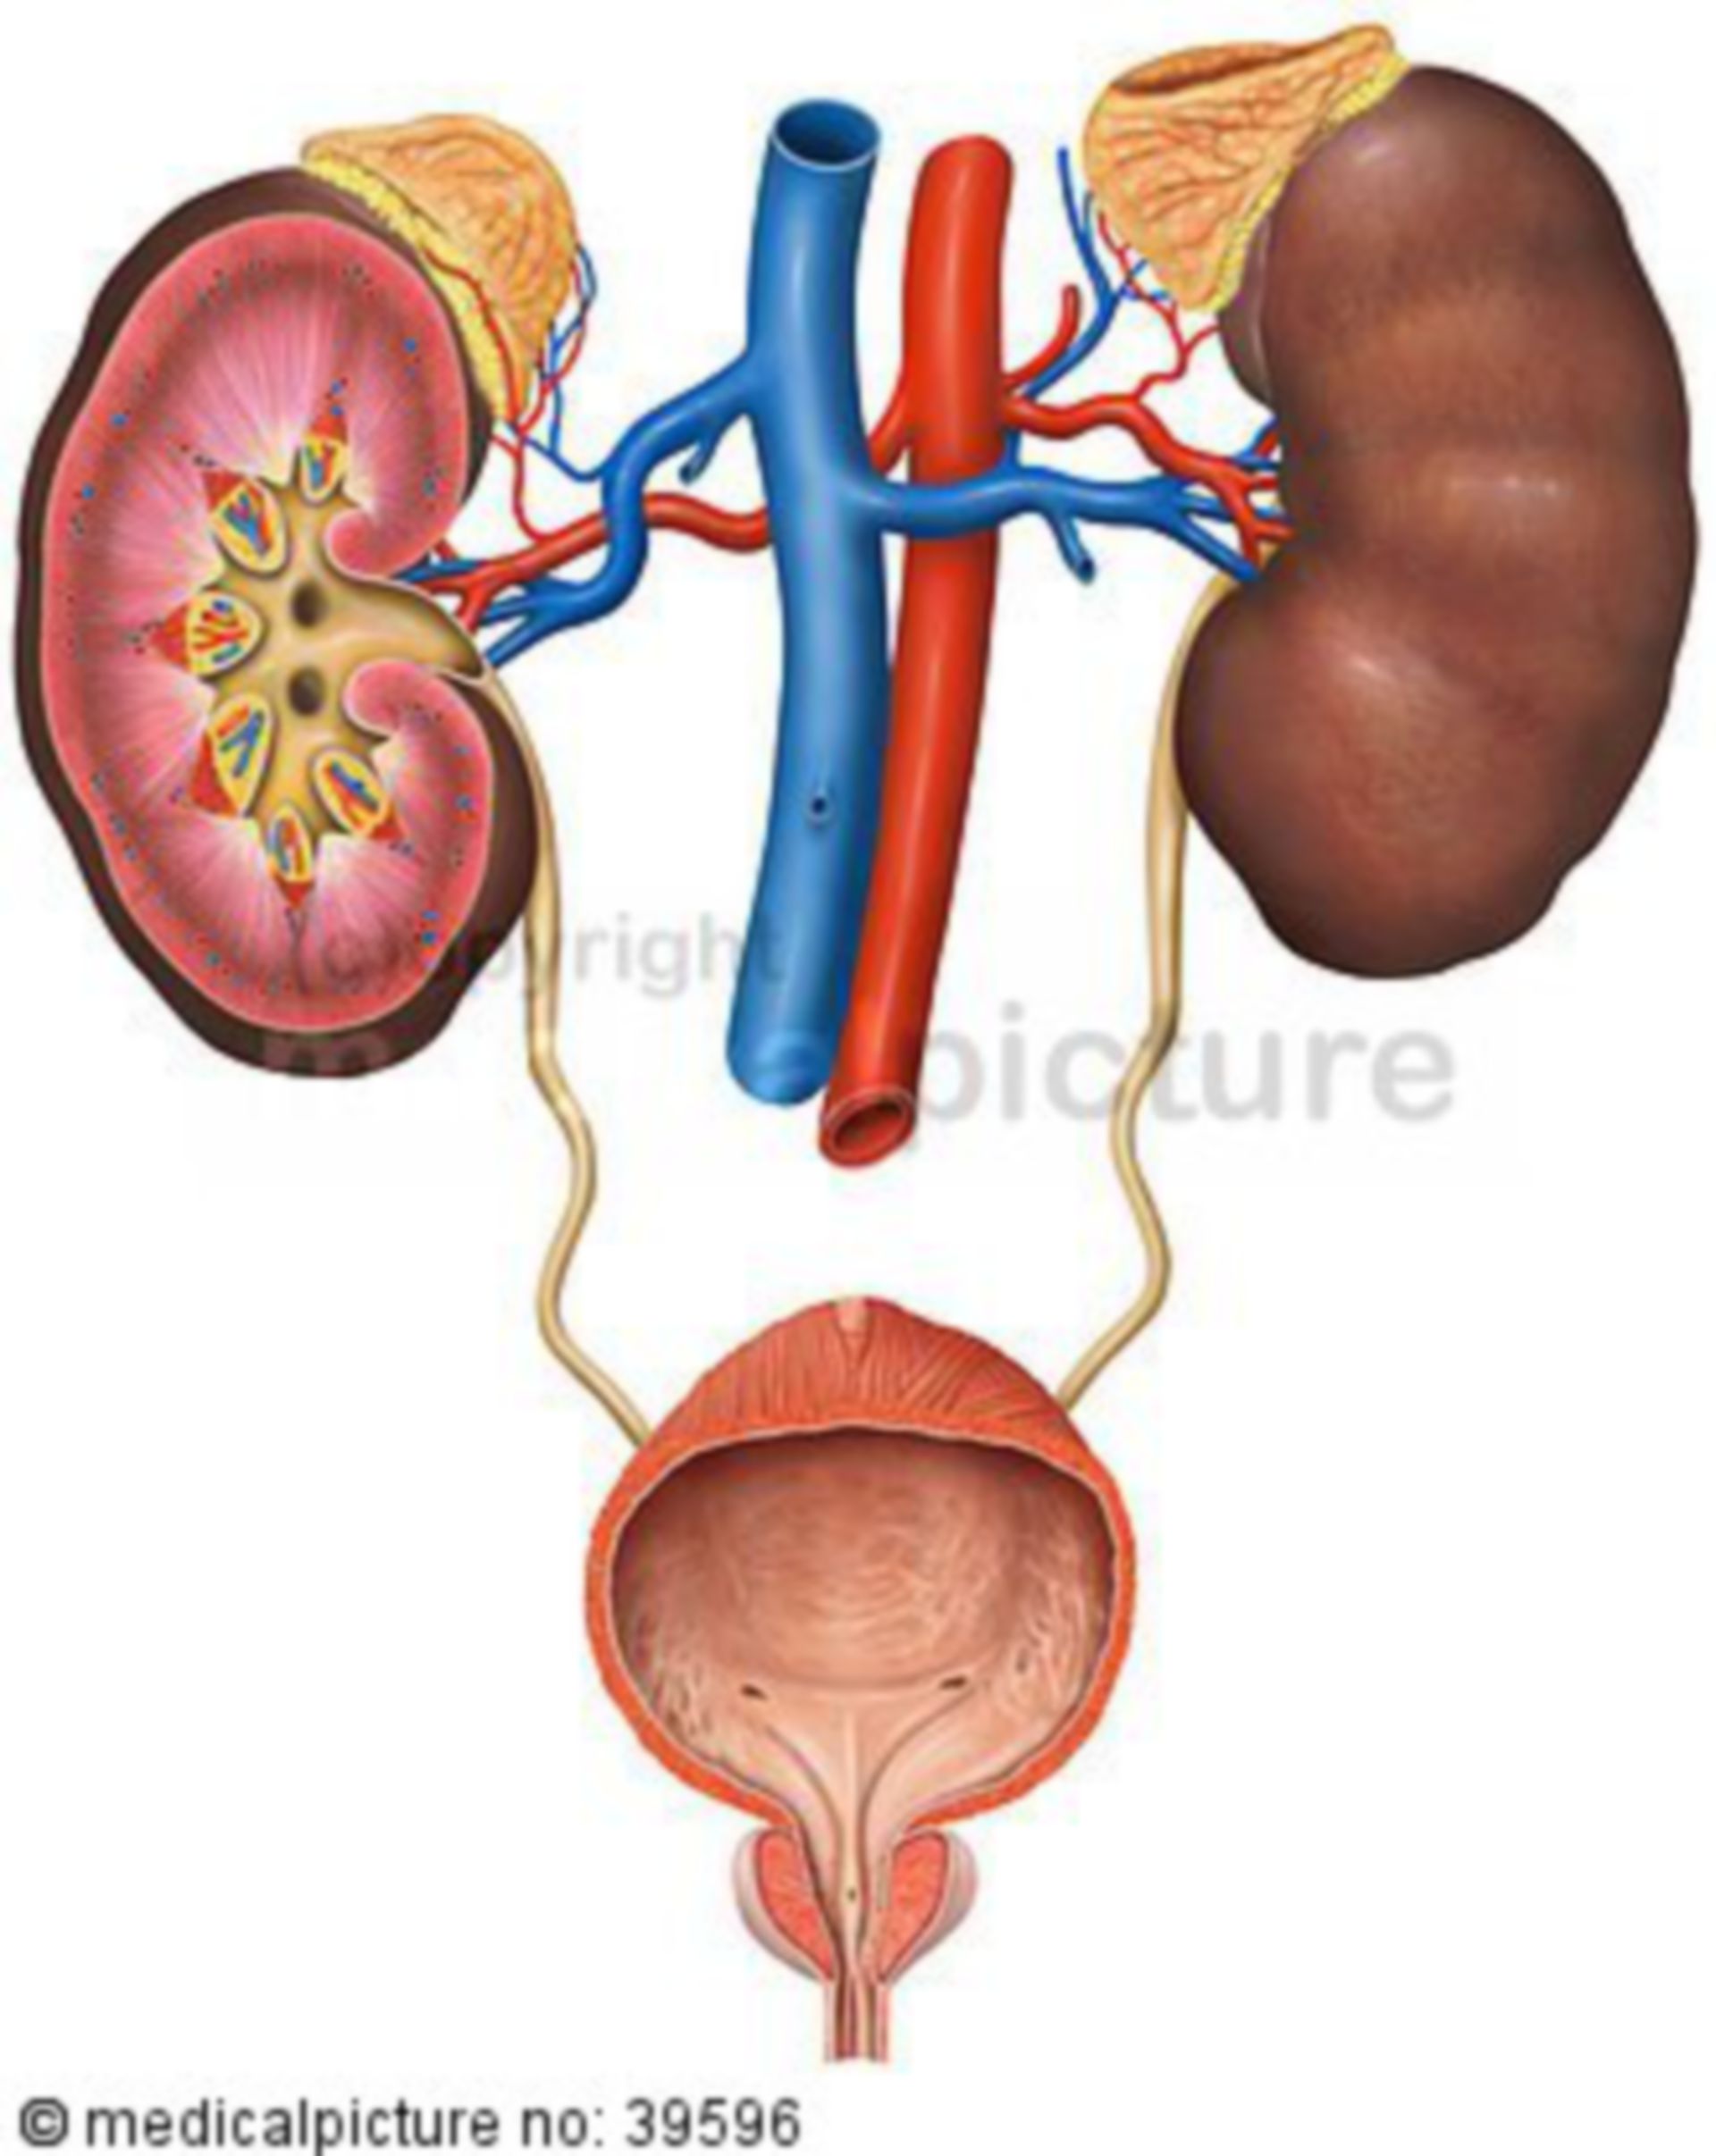 Urinary tract infection and inflammation